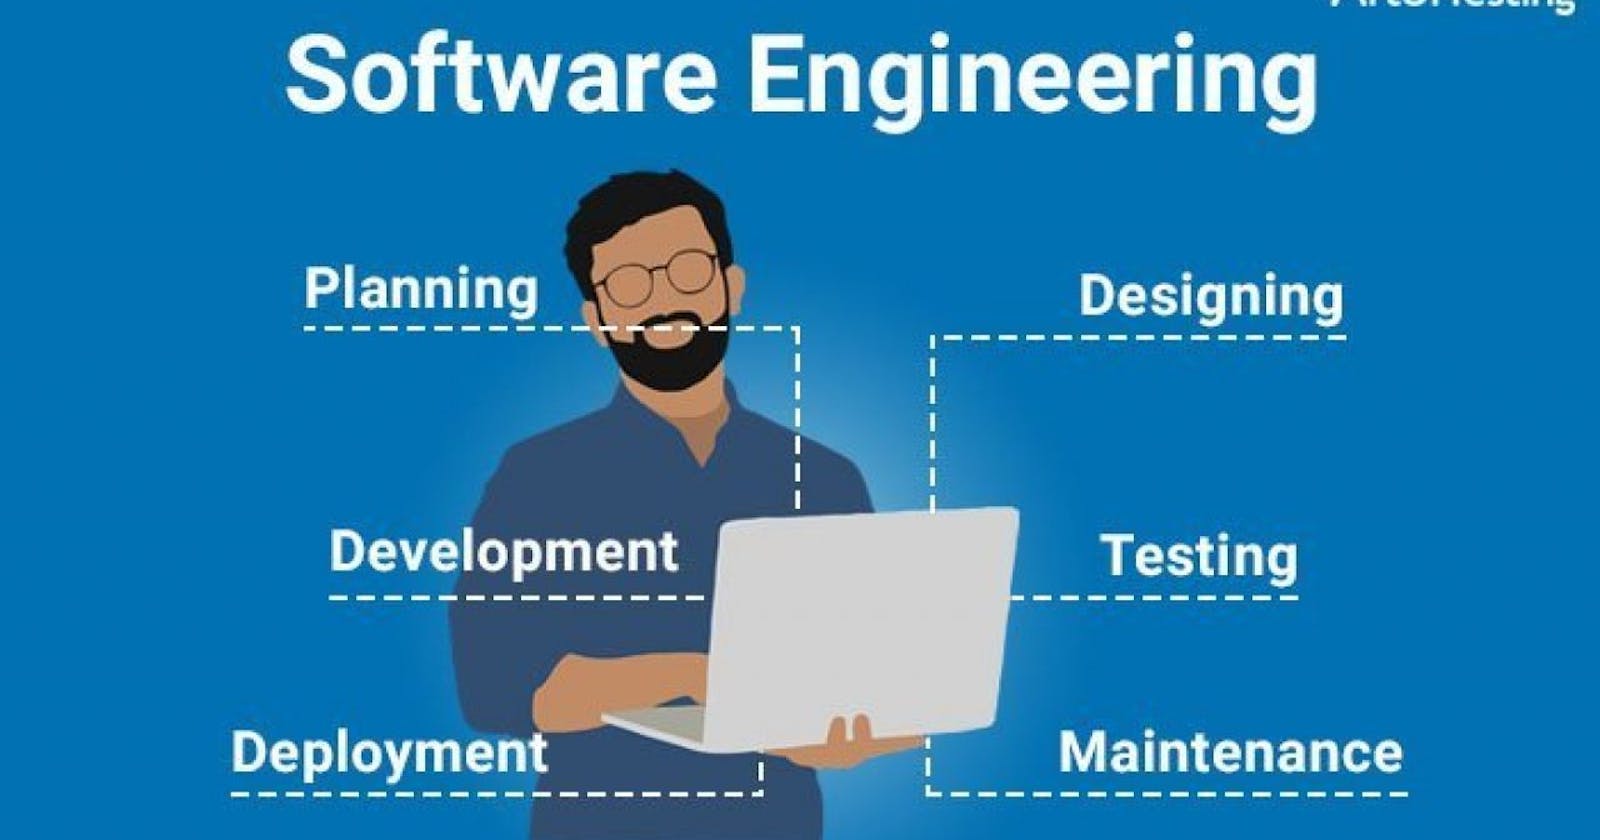 Why I wanted to become a software engineer?